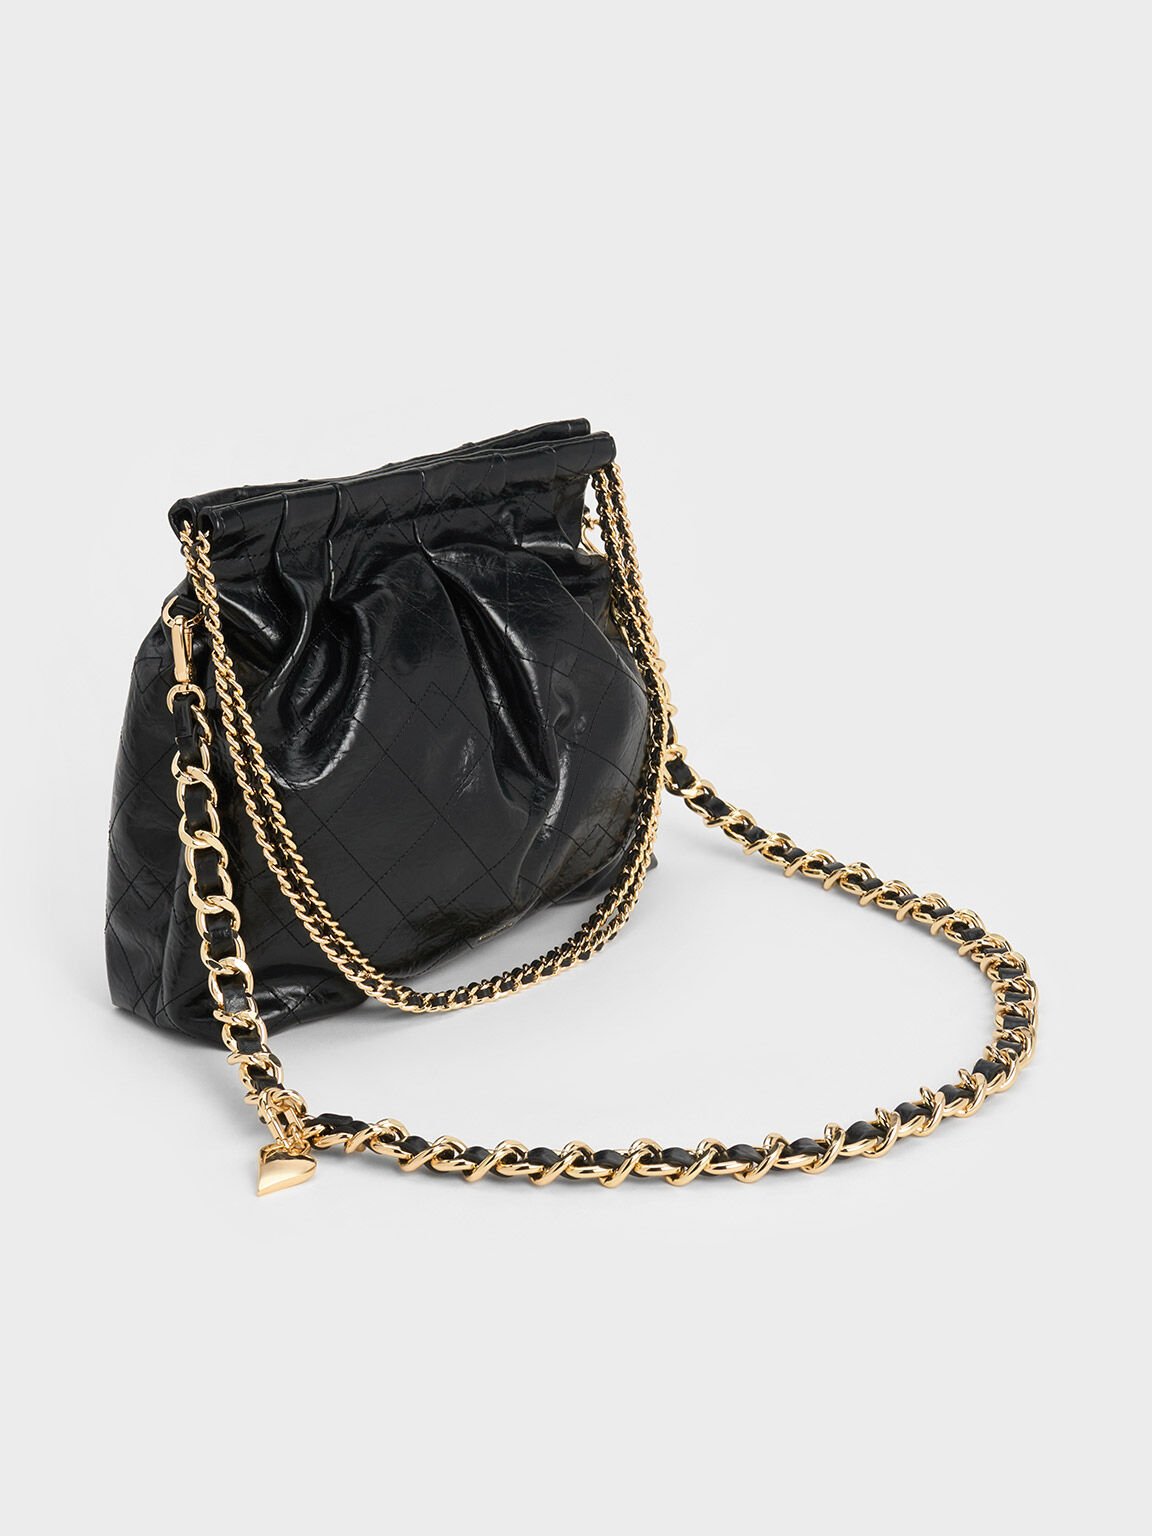 Charles & Keith - Women's Duo Double Chain Hobo Bag, Black, L